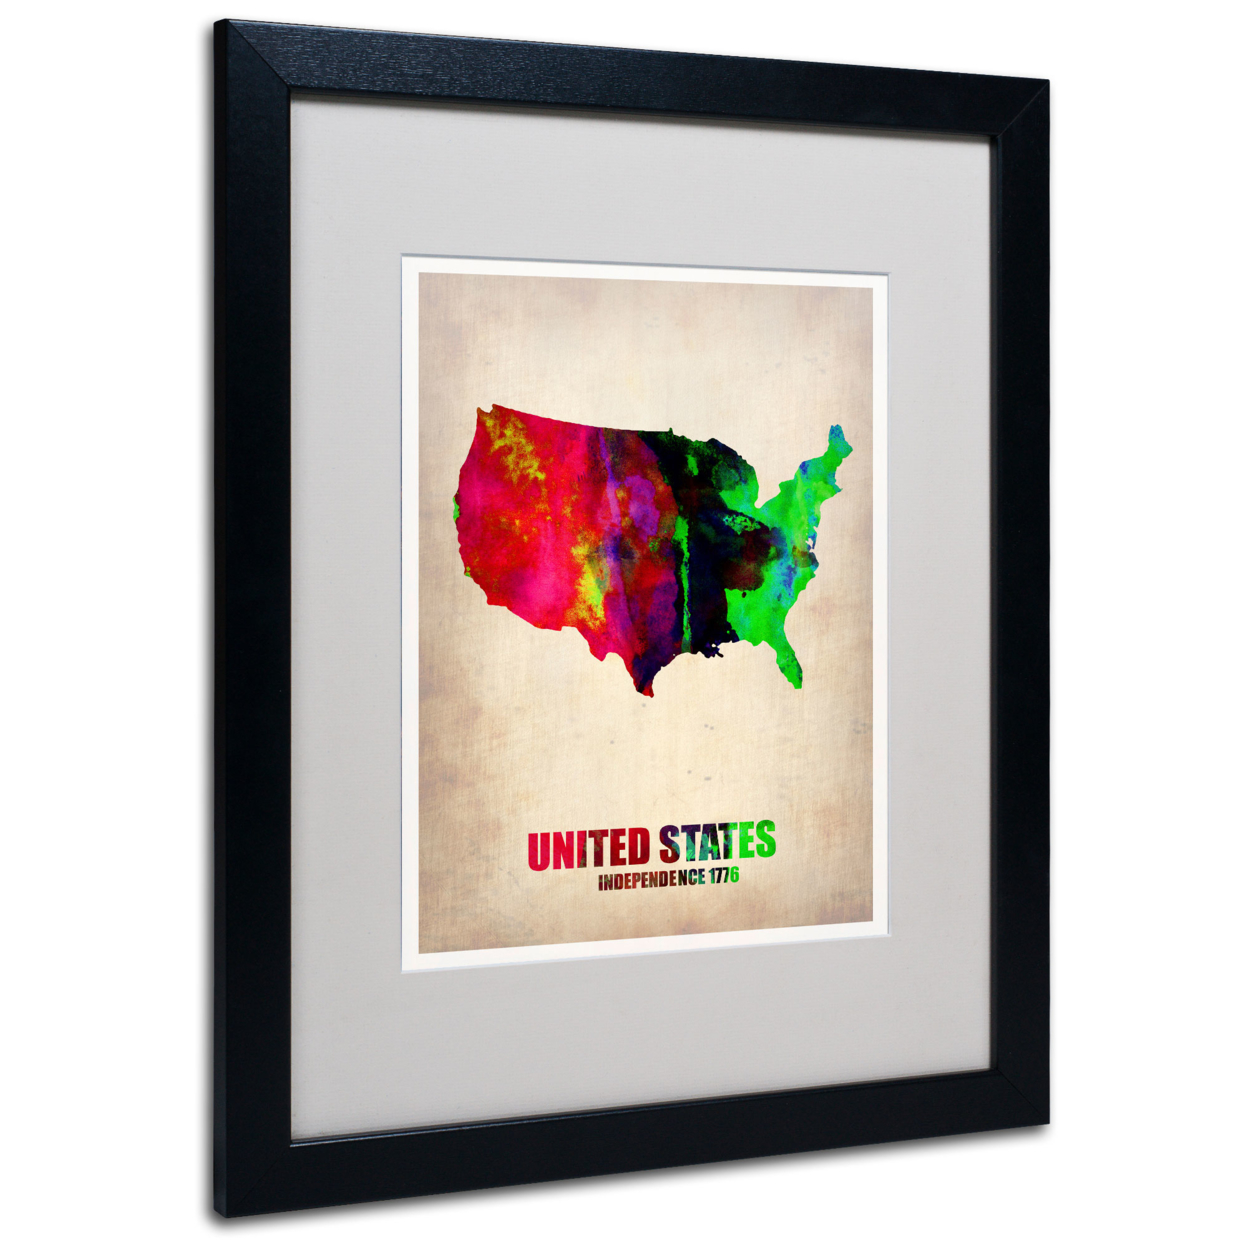 Naxart 'United States Watercolor Map' Black Wooden Framed Art 18 X 22 Inches